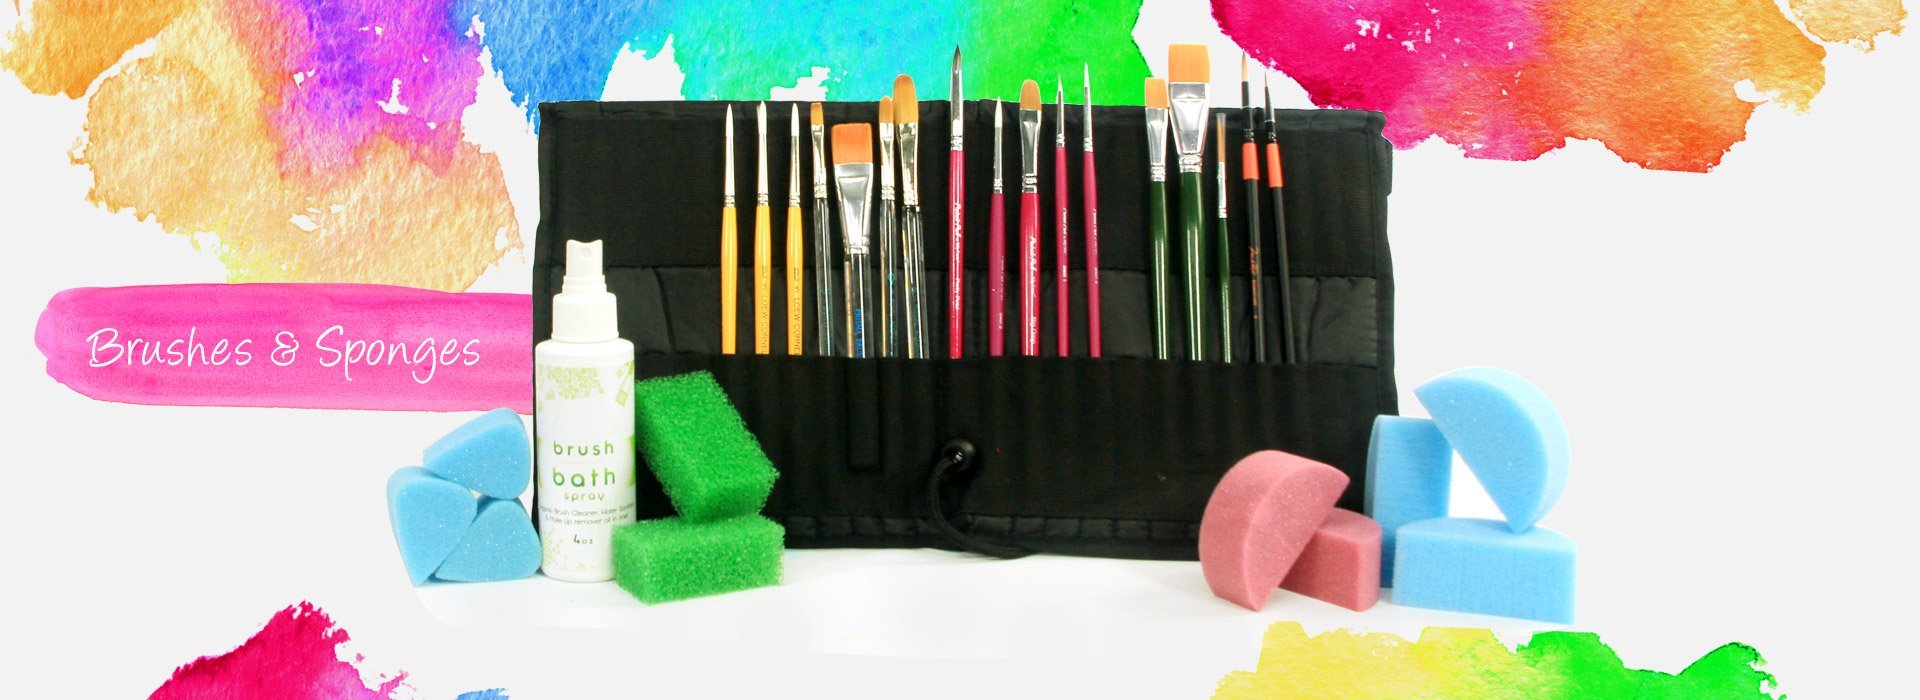 Brushes & Sponges, Face Paint Products, Silly Farm